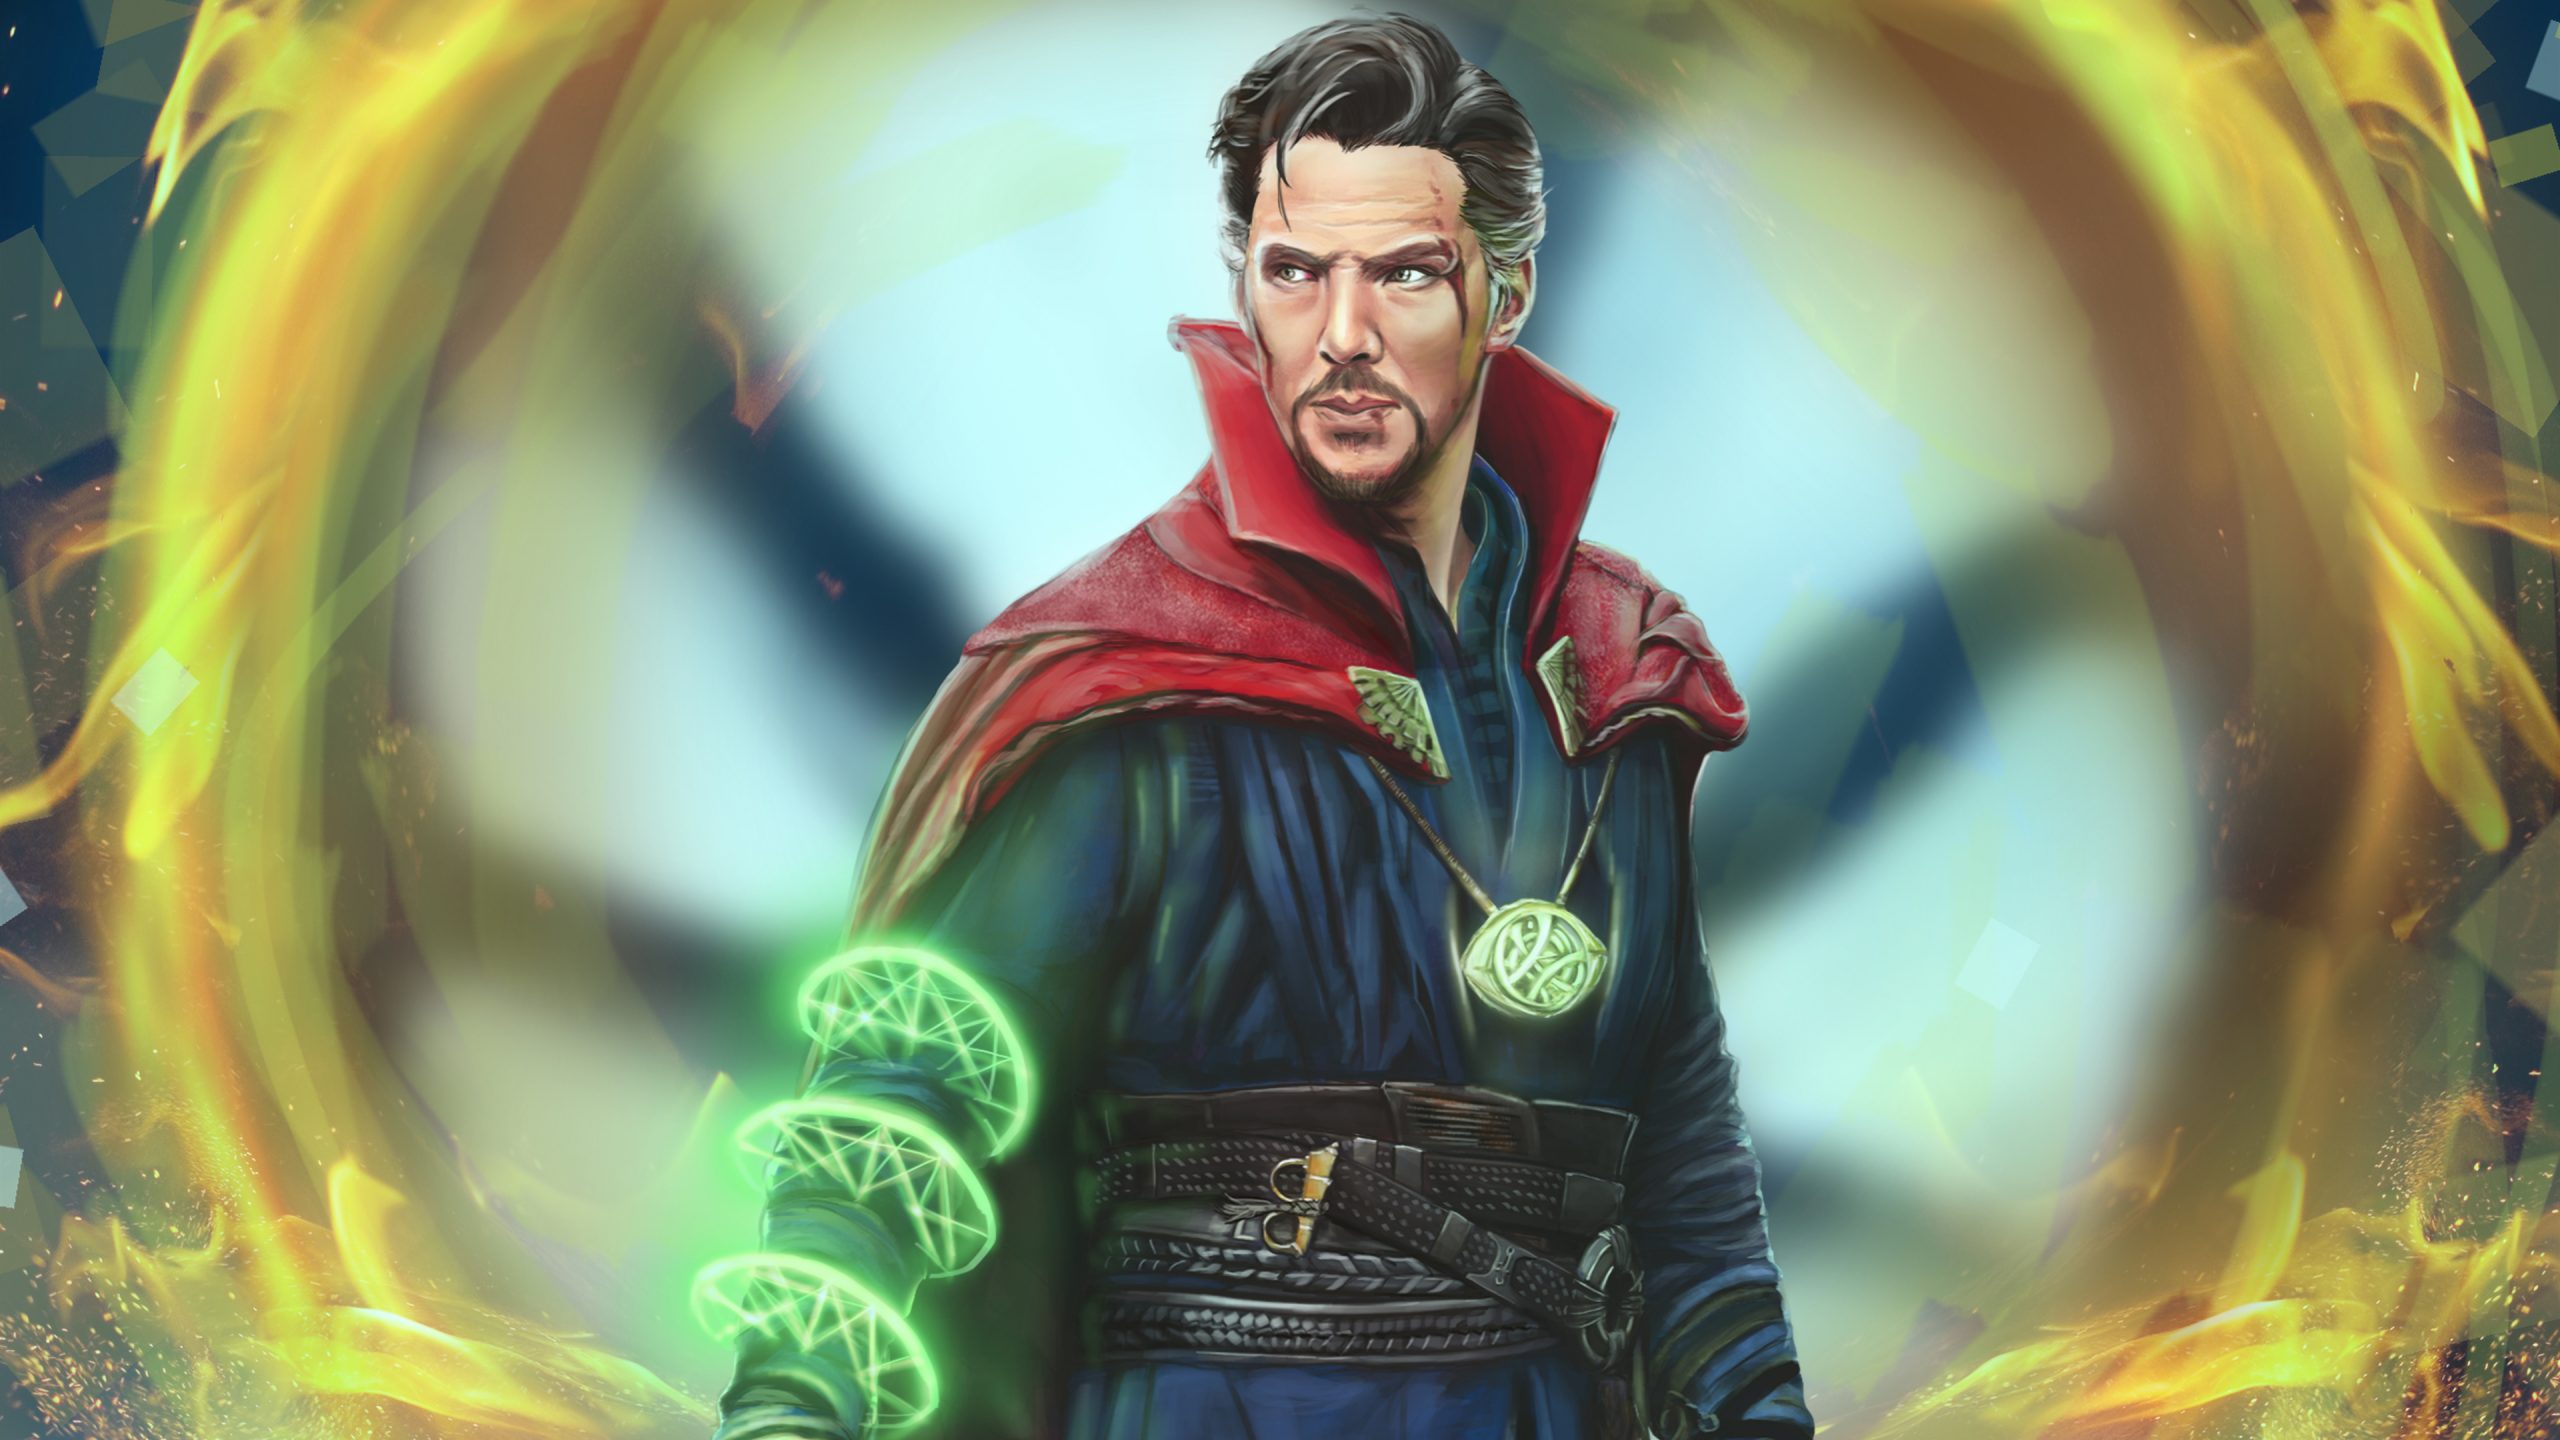 "Doctor Strange in the Multiverse of Madness"